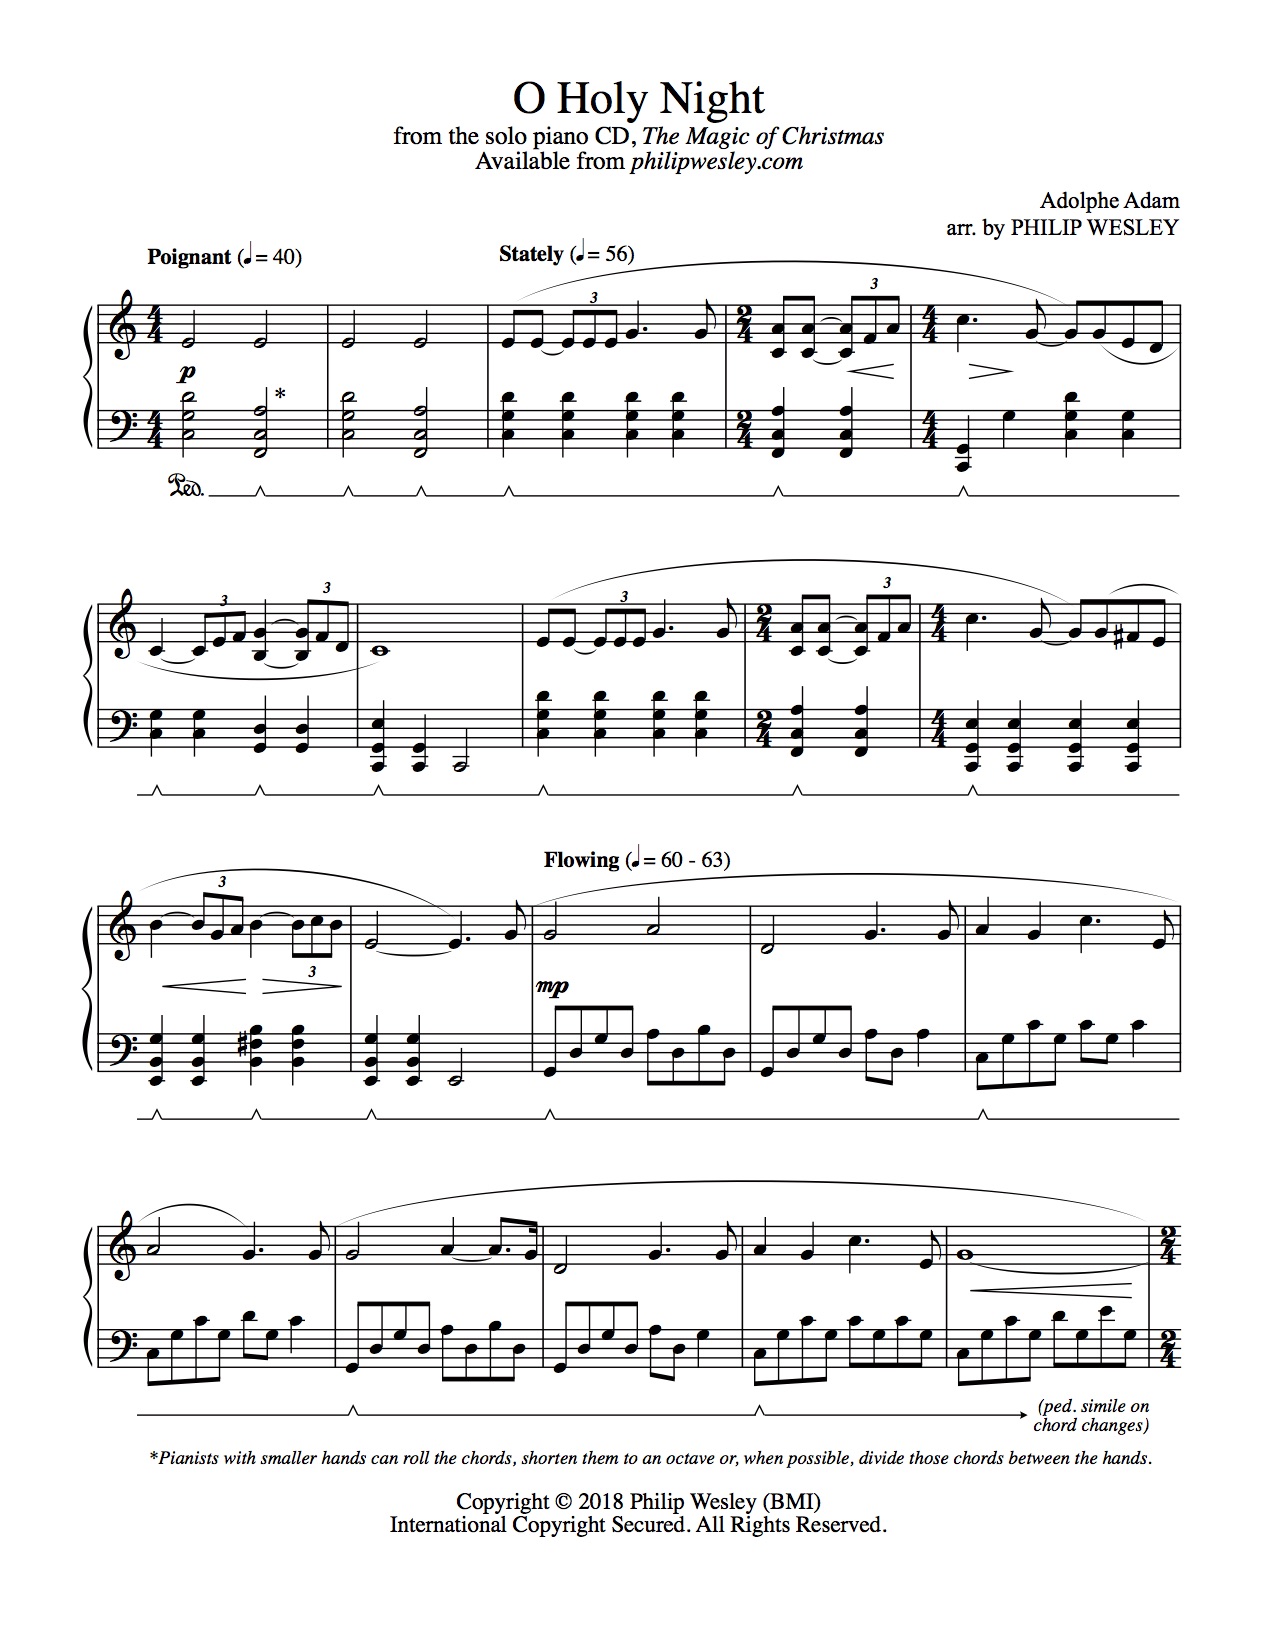 Oh holy night by Various - Piano Solo - Digital Sheet Music